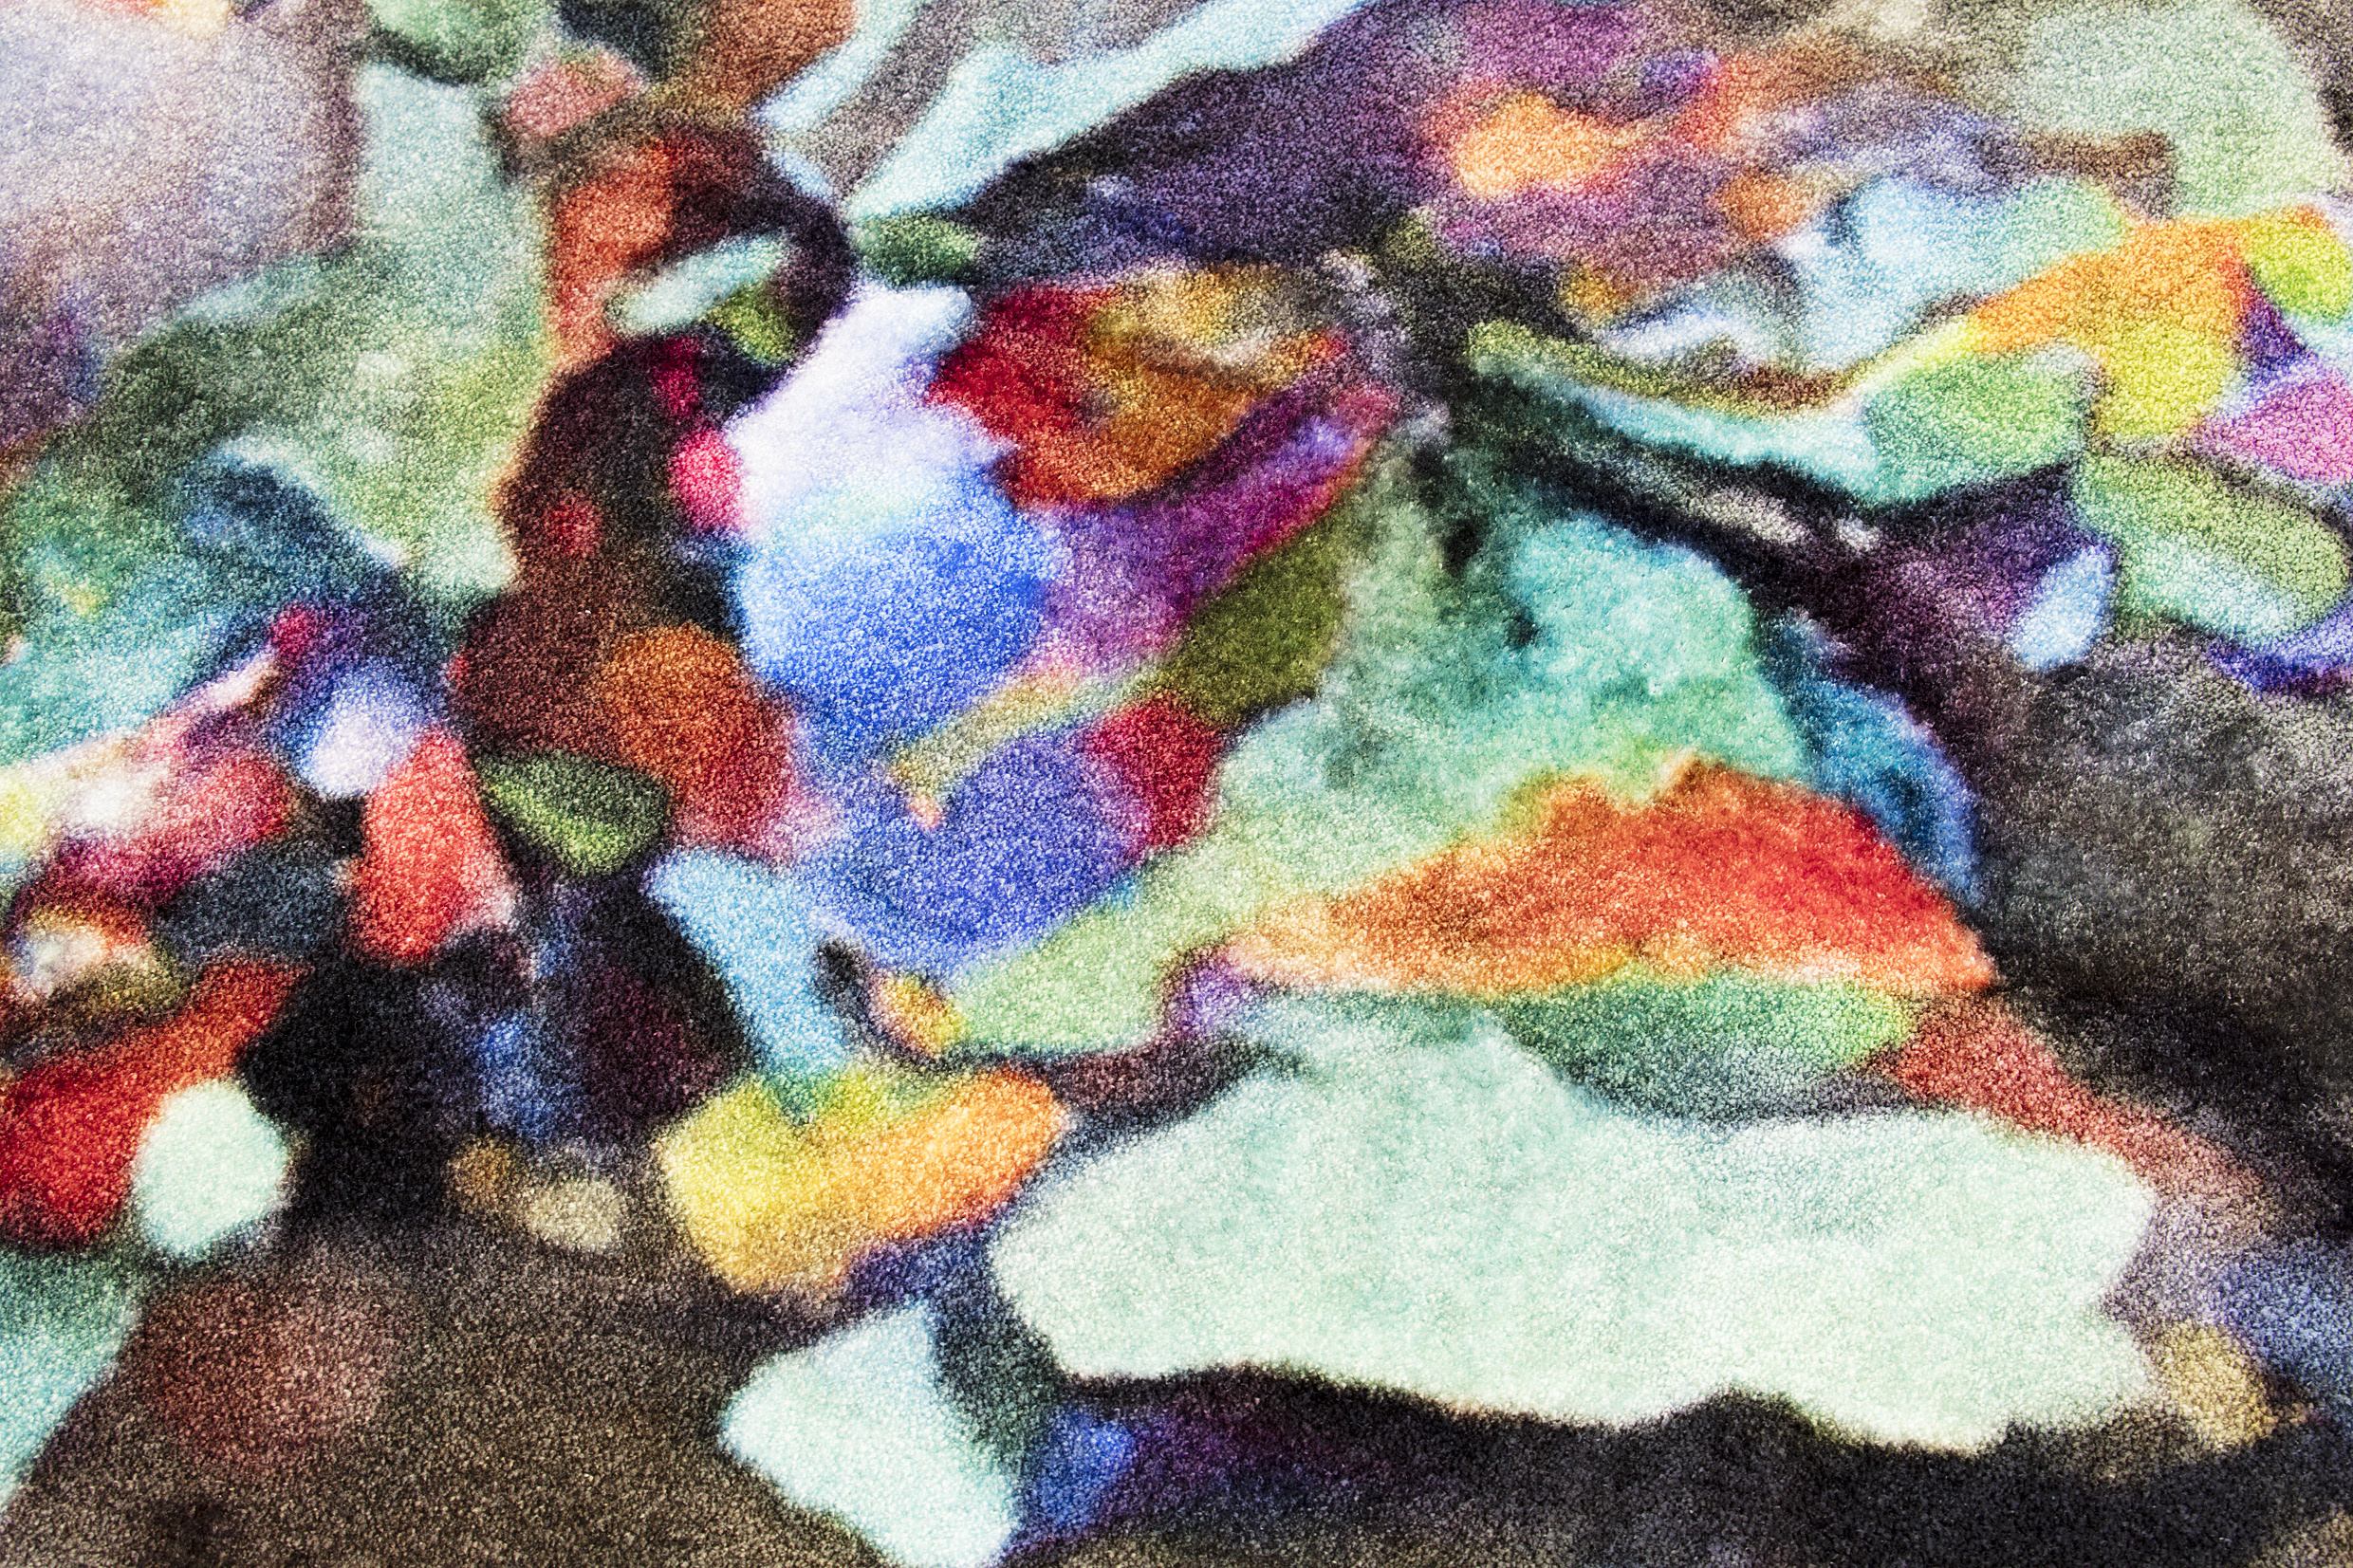 a close-up of the multicoloured shapes in the carpet